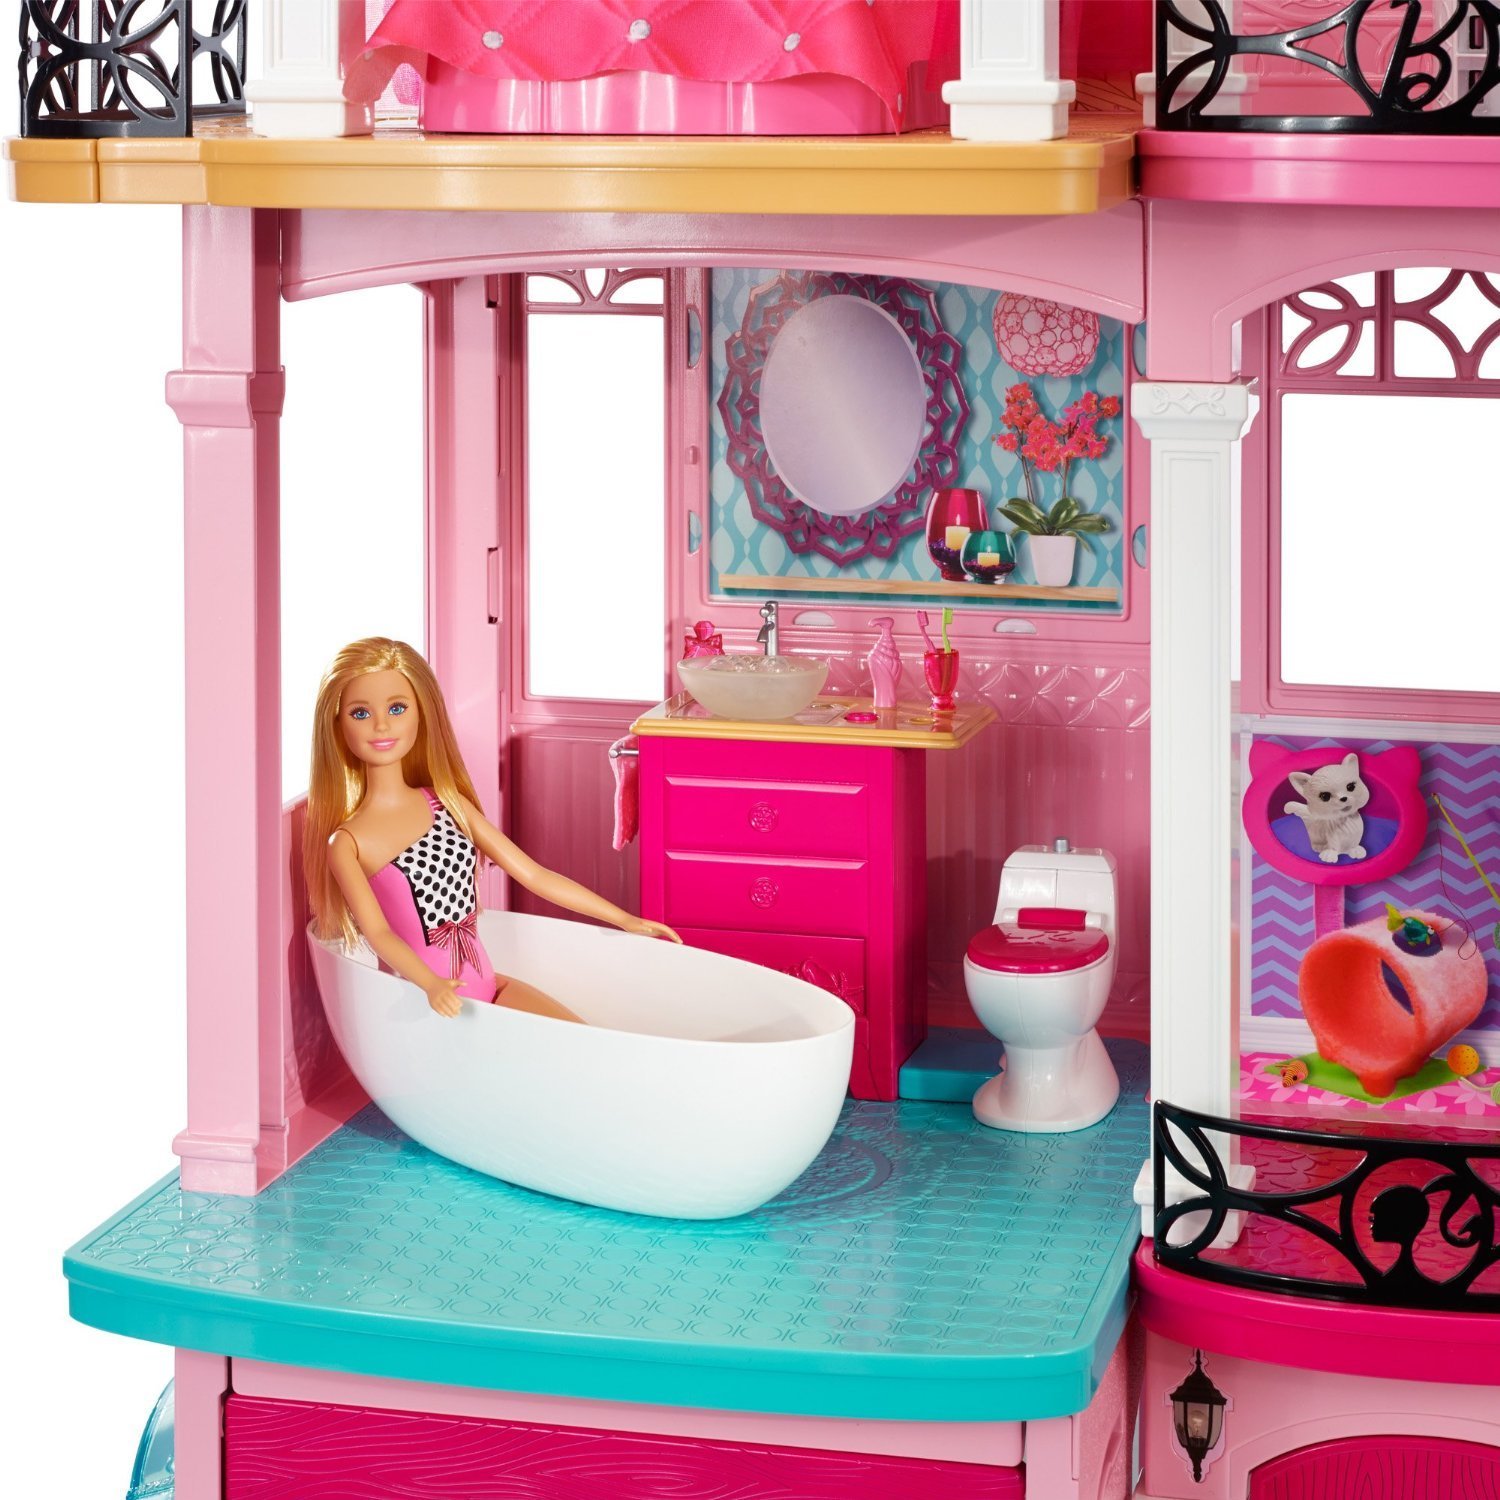 barbie doll house with garage